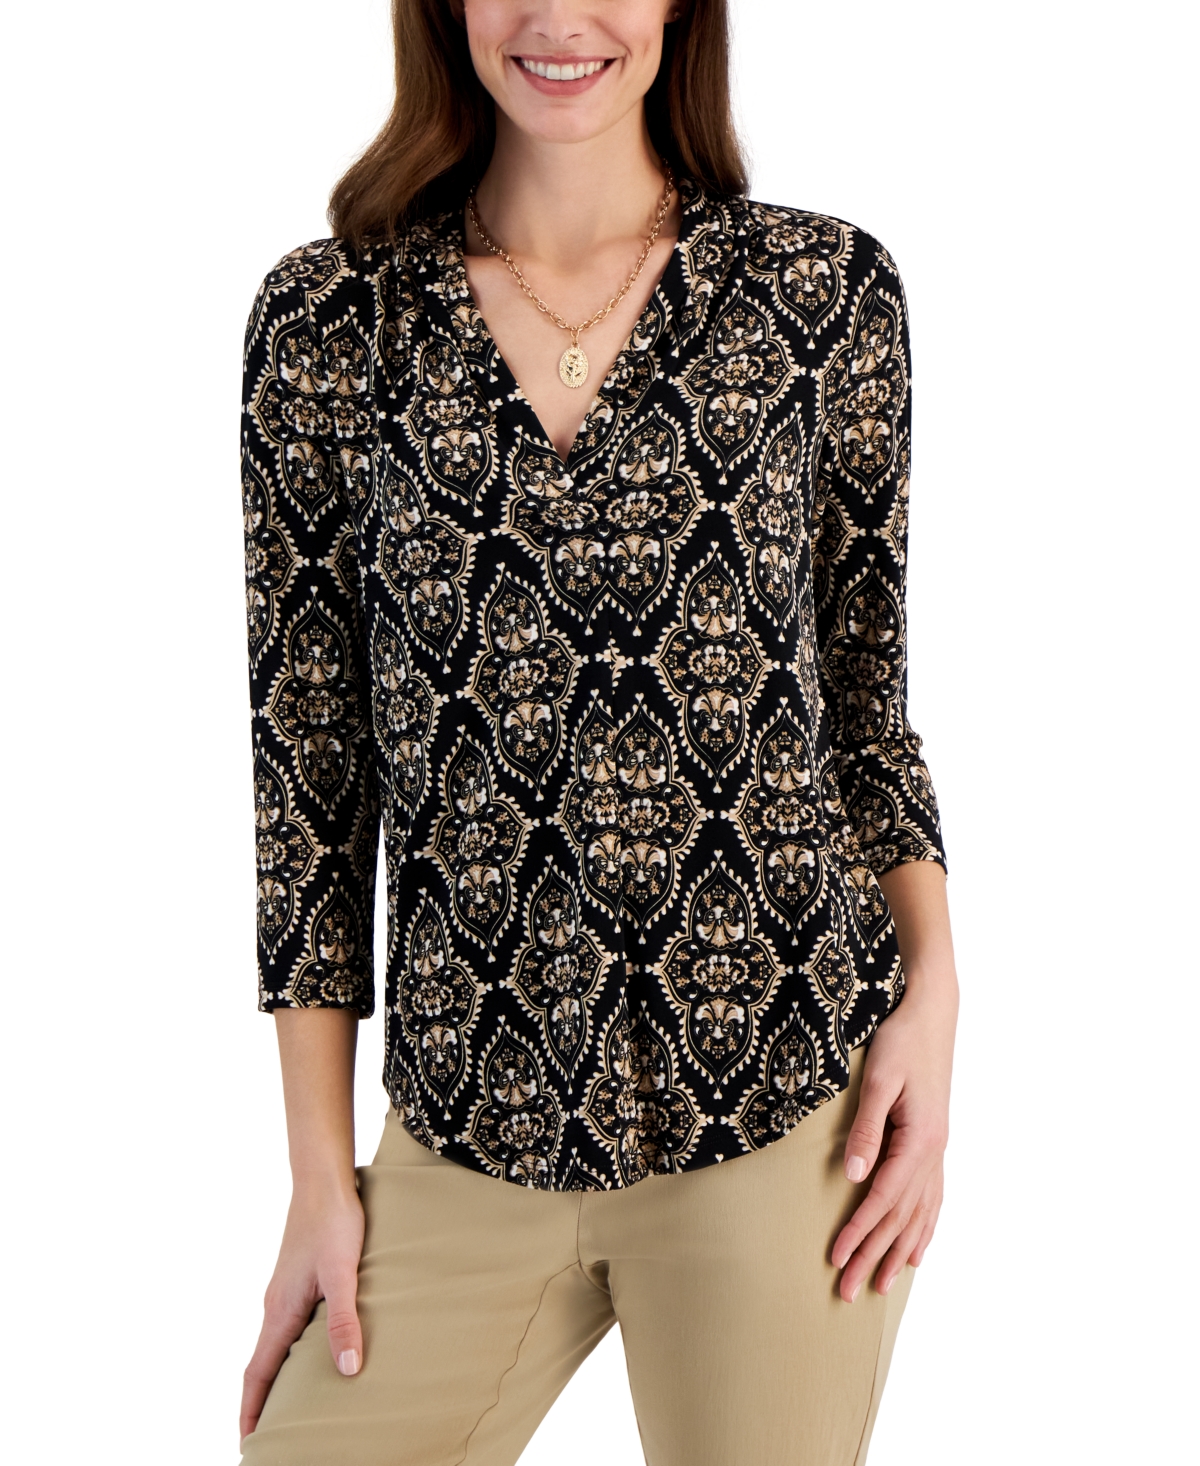 Women's Printed 3/4 Sleeve V-Neck Knit Top, Created for Macy's - Intrepid Blue Combo